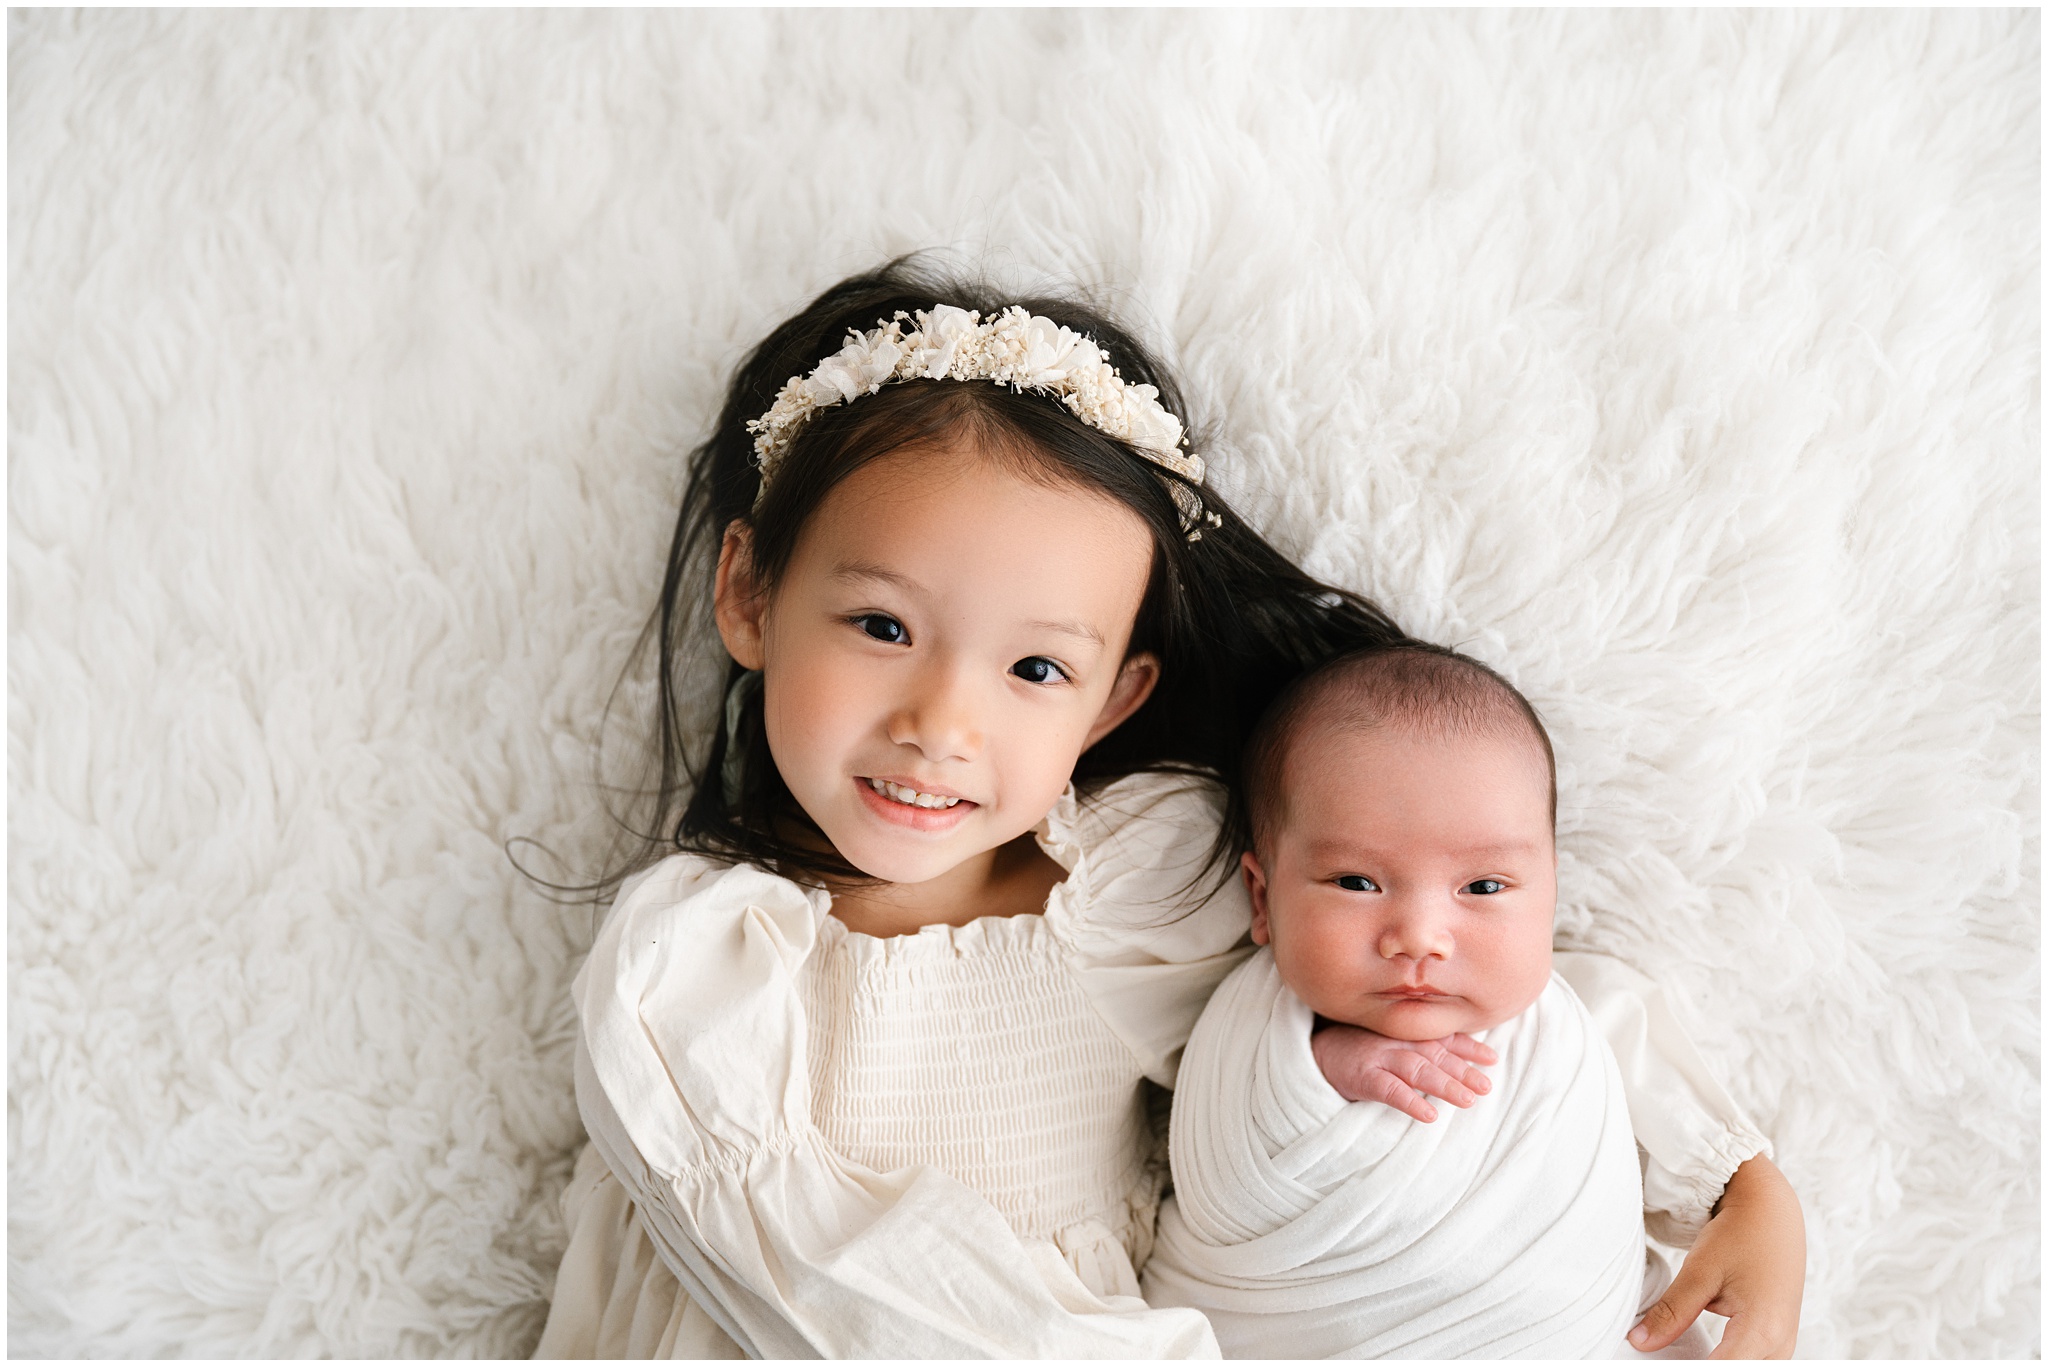 Siblings pose during newborn studio session. Photo by Meg Newton Photography.